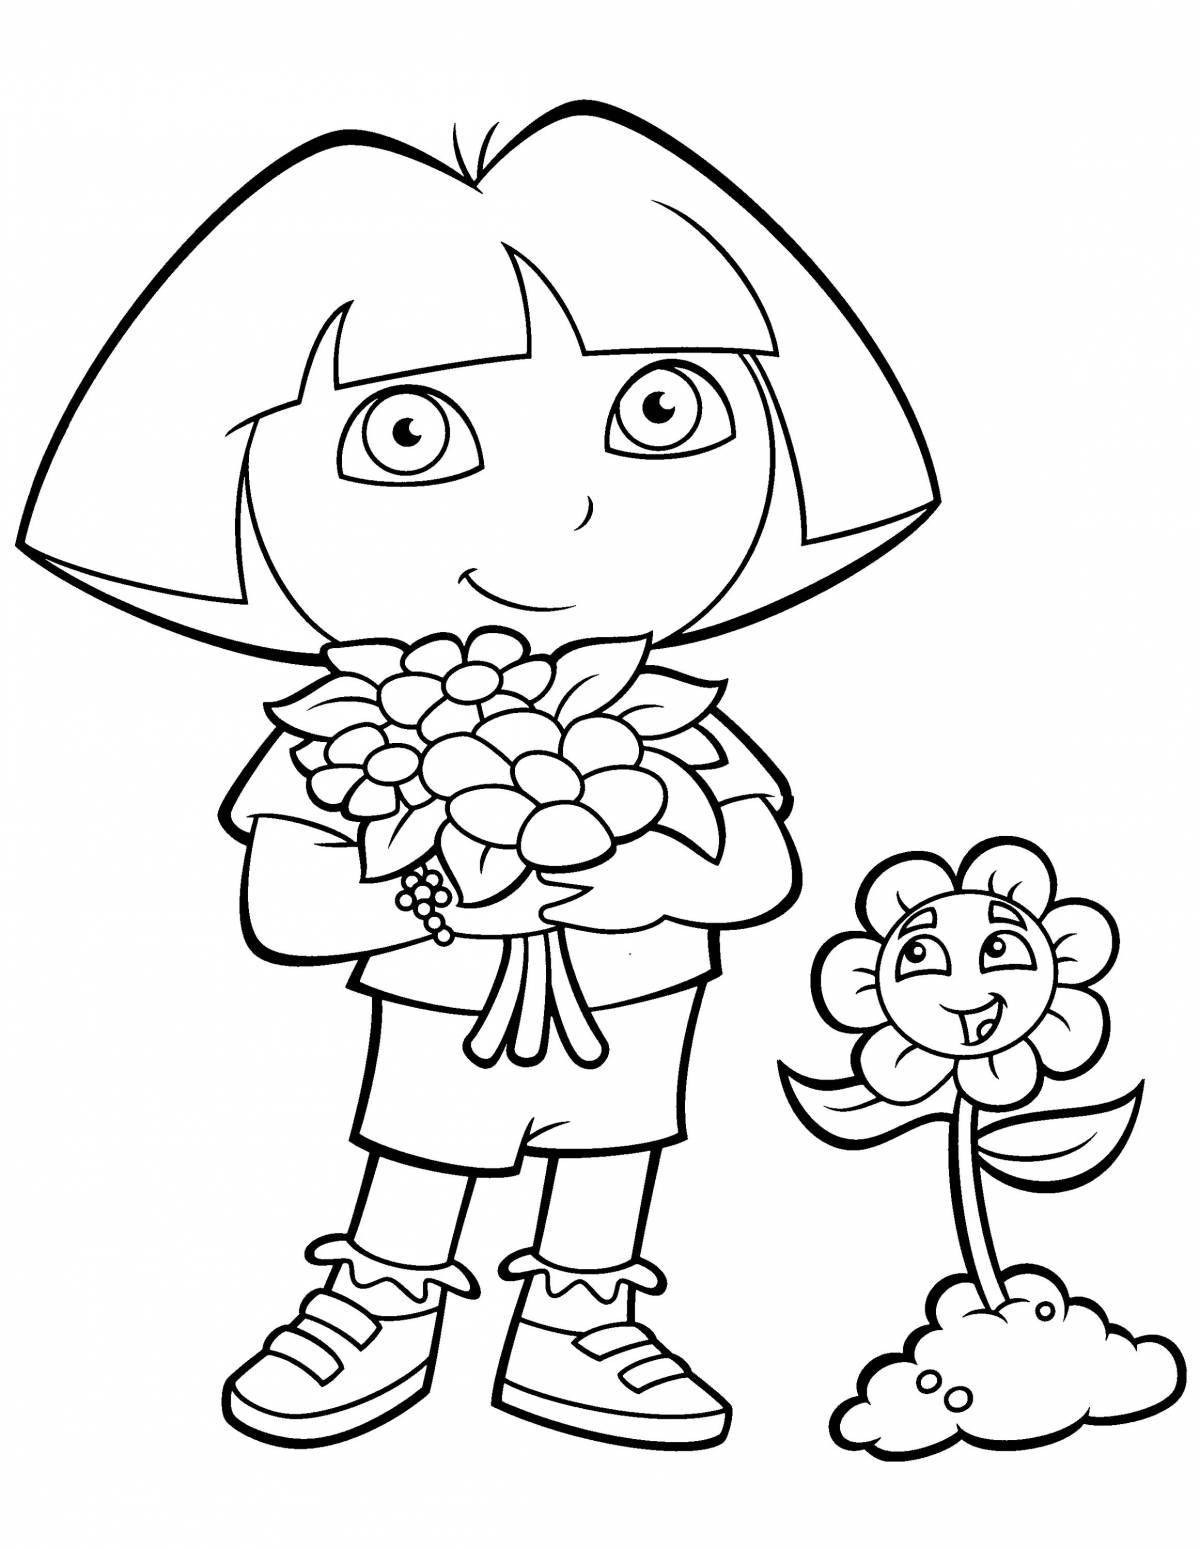 Dora dynamic coloring page